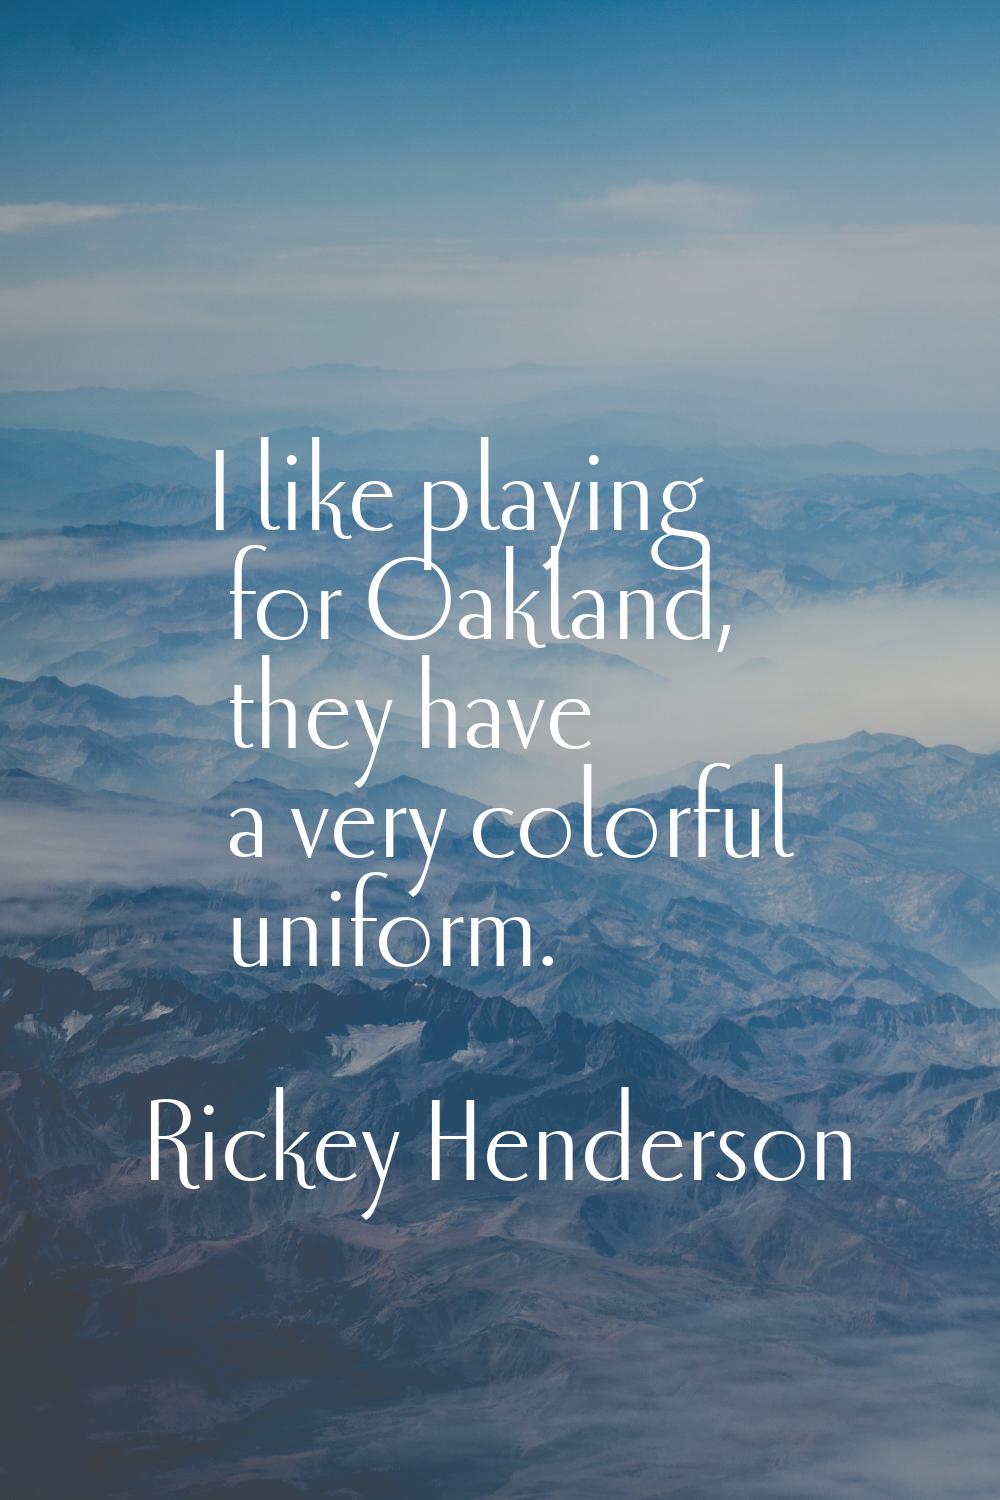 I like playing for Oakland, they have a very colorful uniform.